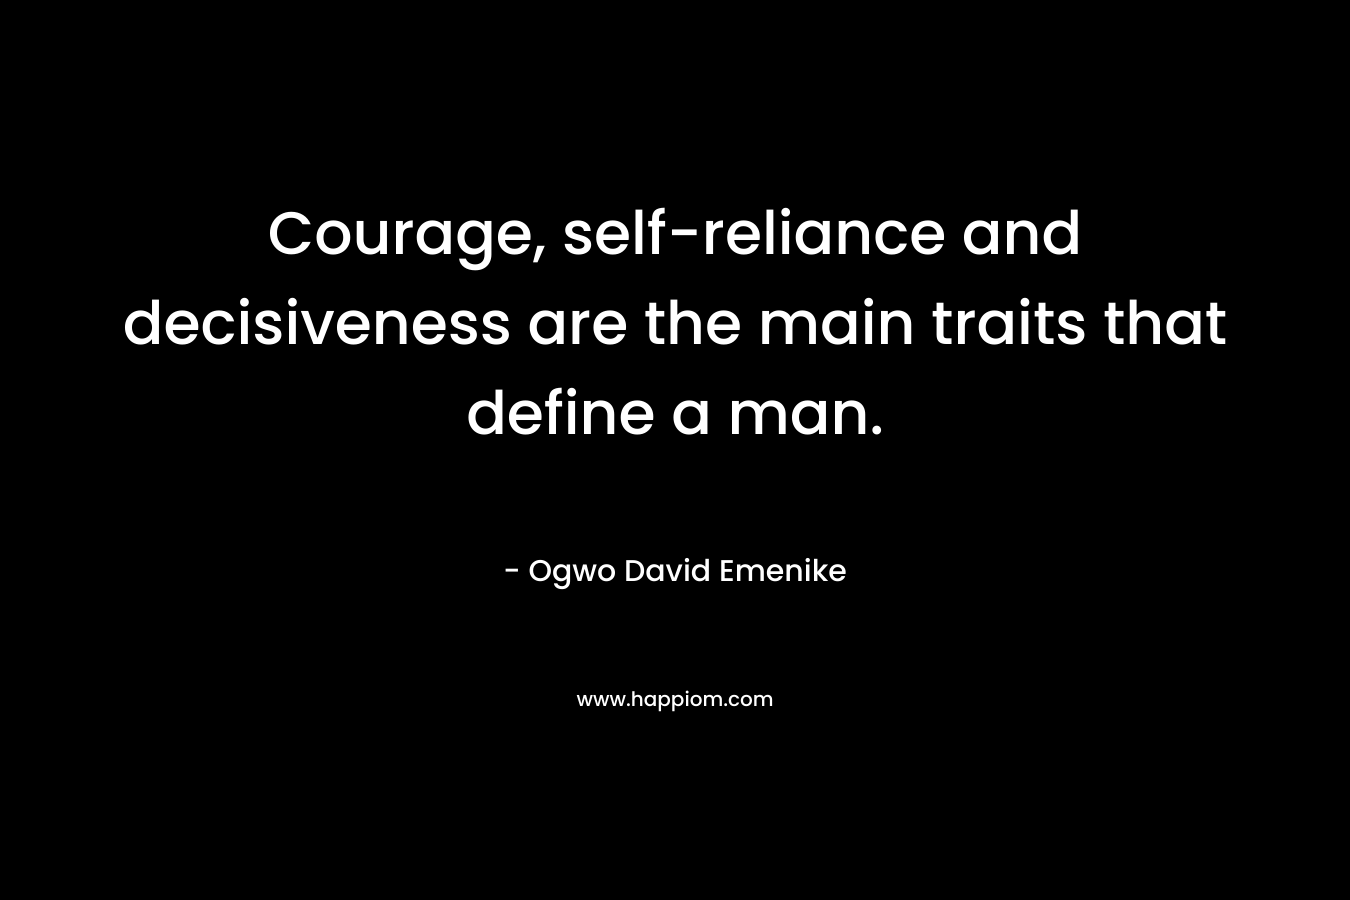 Courage, self-reliance and decisiveness are the main traits that define a man. – Ogwo David Emenike